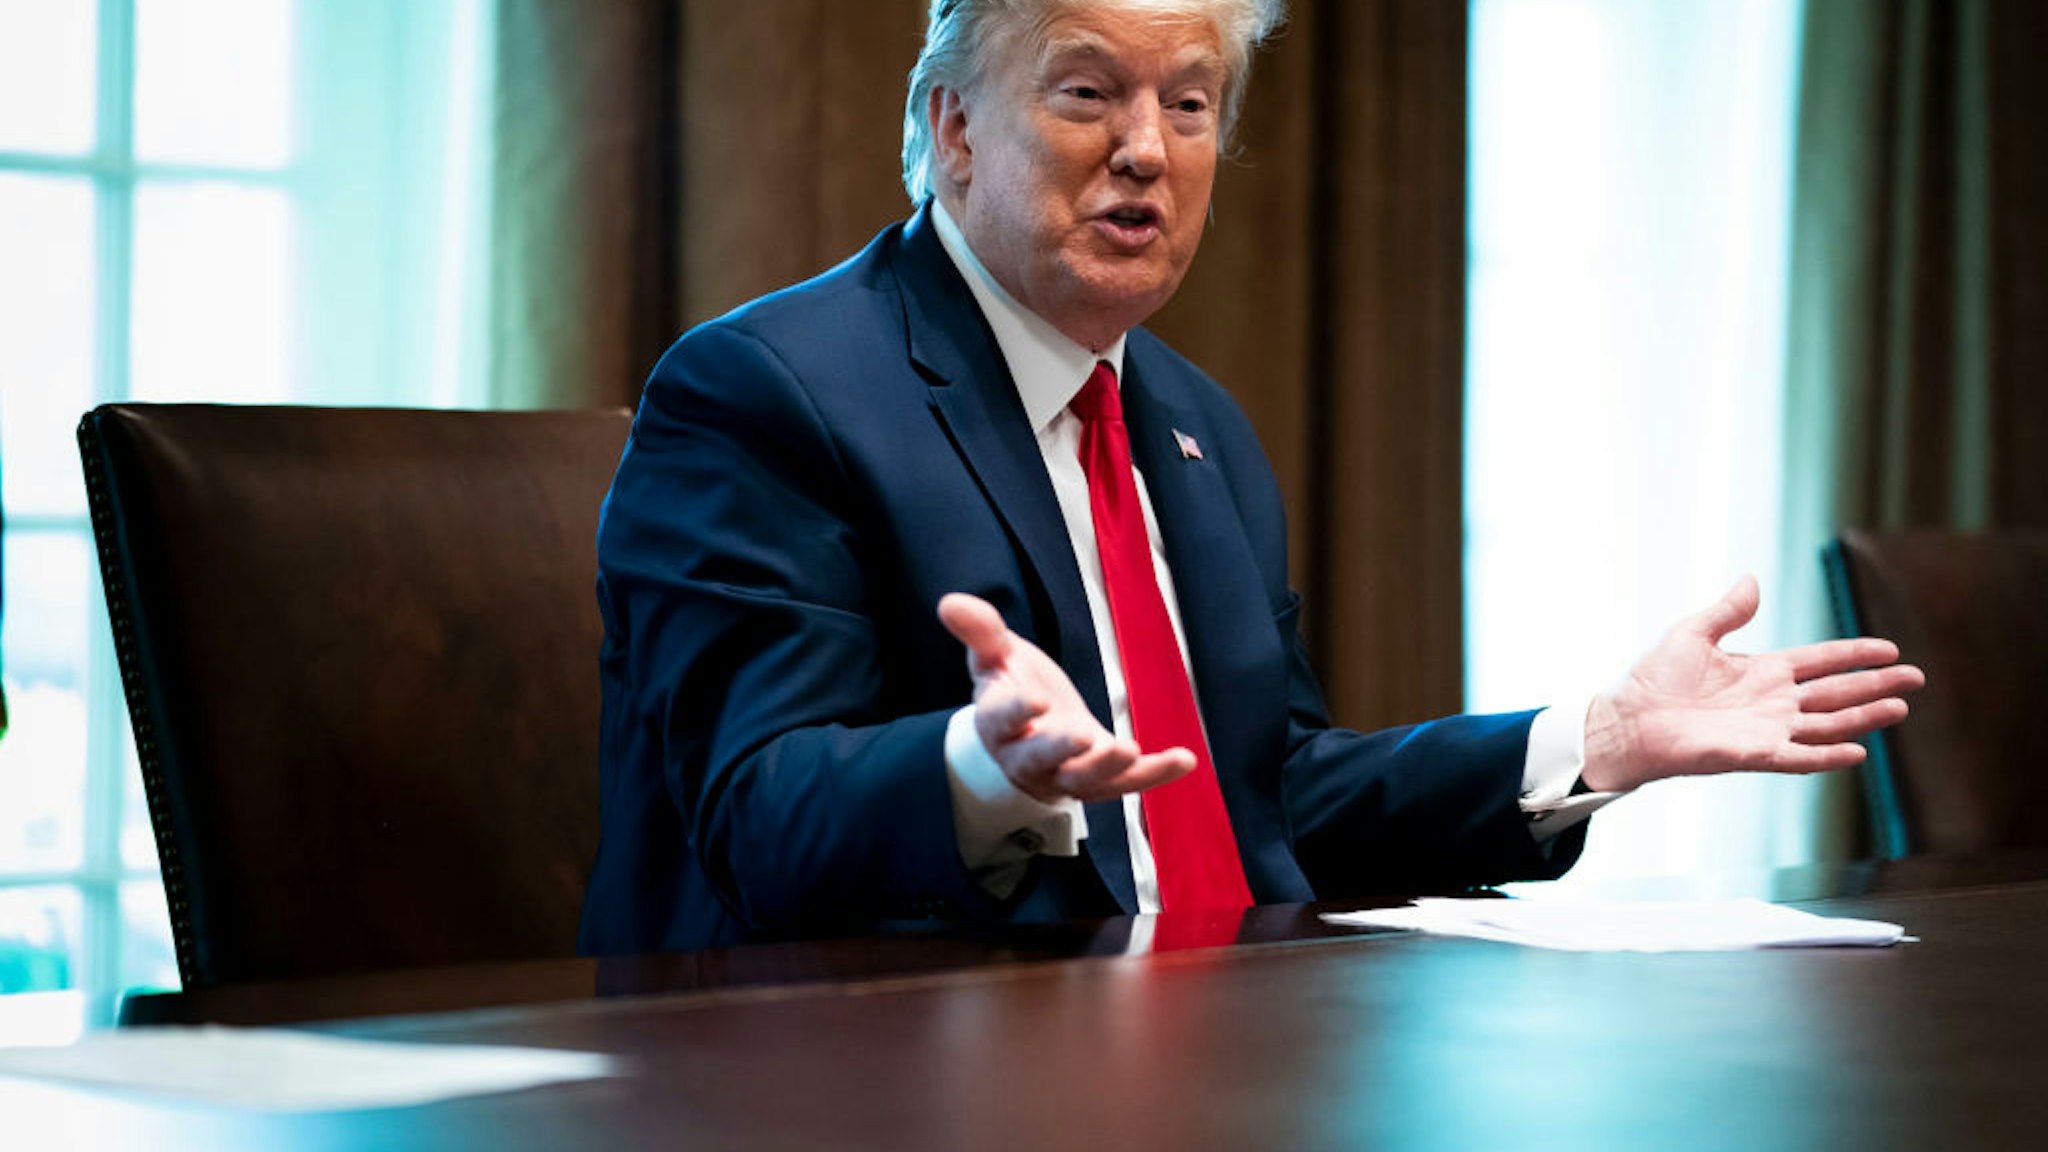 President Donald Trump speaks during a meeting with recovered coronavirus (COVID-19) patients in the Cabinet Room at the White House April 14, 2020 in Washington, D.C.